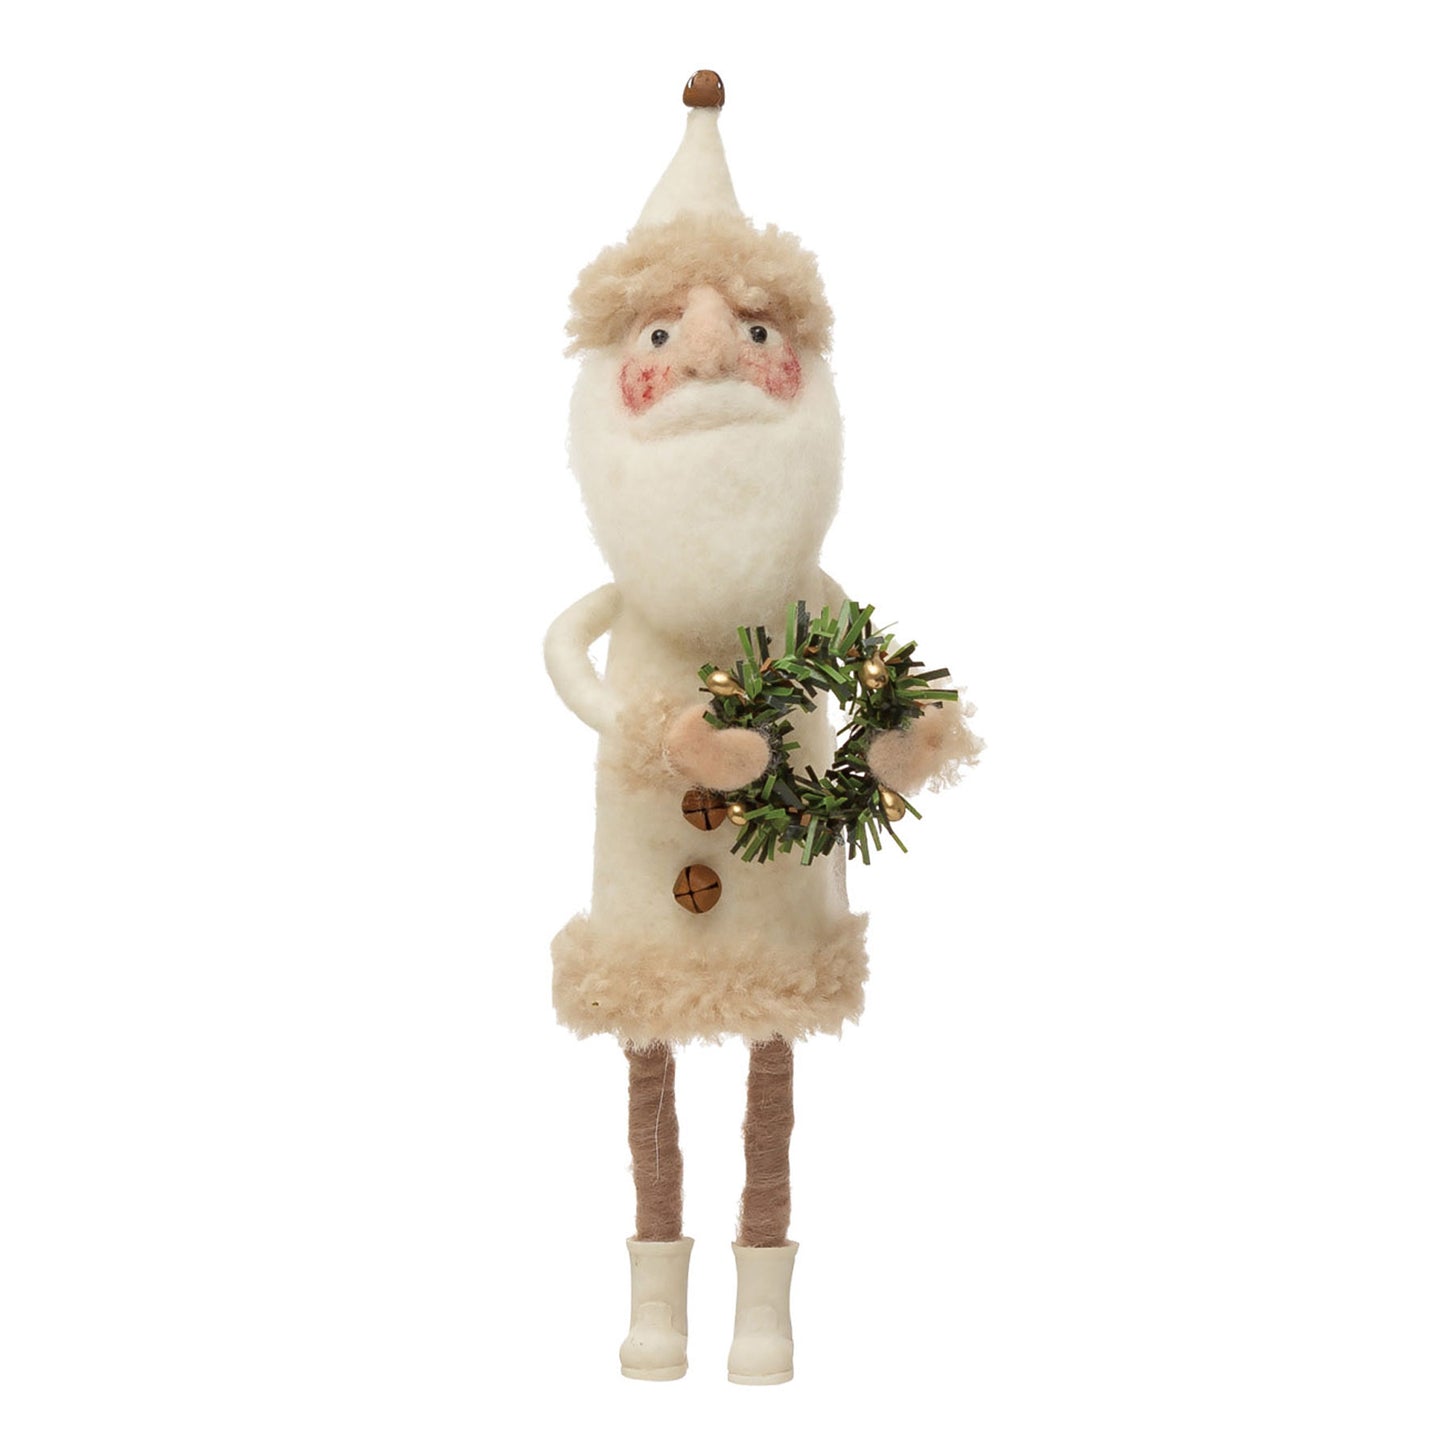 Creative Co-op Wool Felt Santa Decoration - Cream Outfit with Jingle Bell Buttons and Wreath